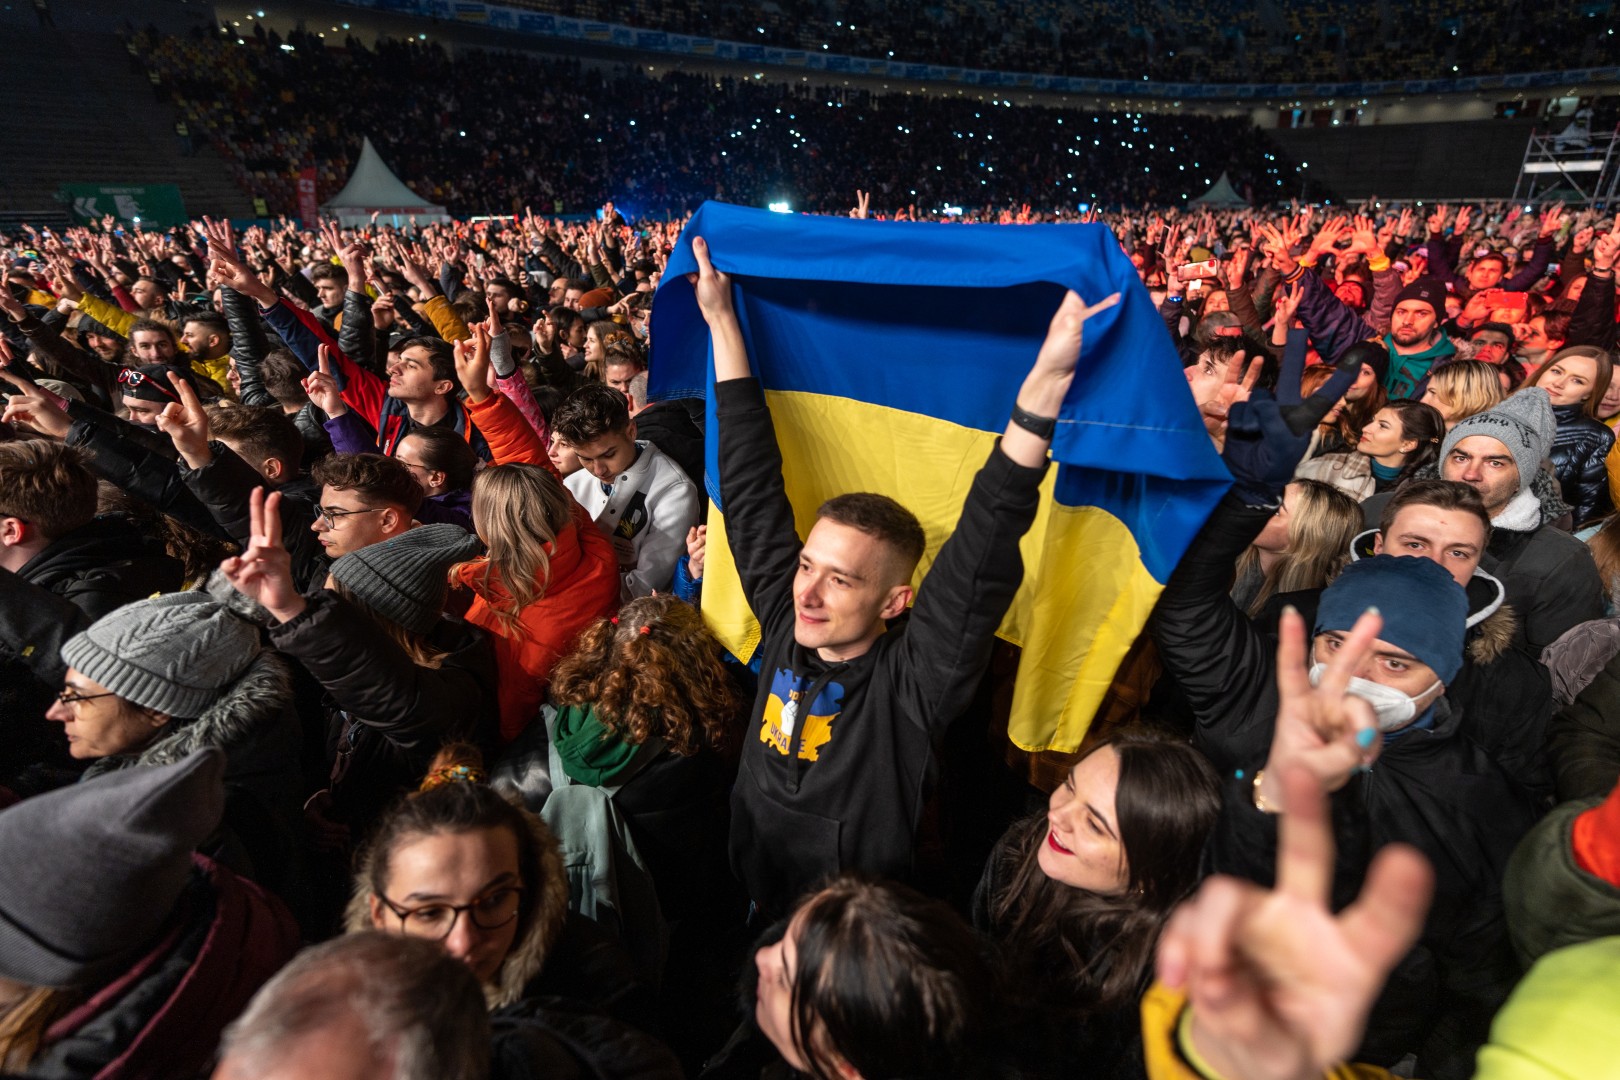 Public at National Arena in Bucharest on March 12, 2022 (fb7c869c20)